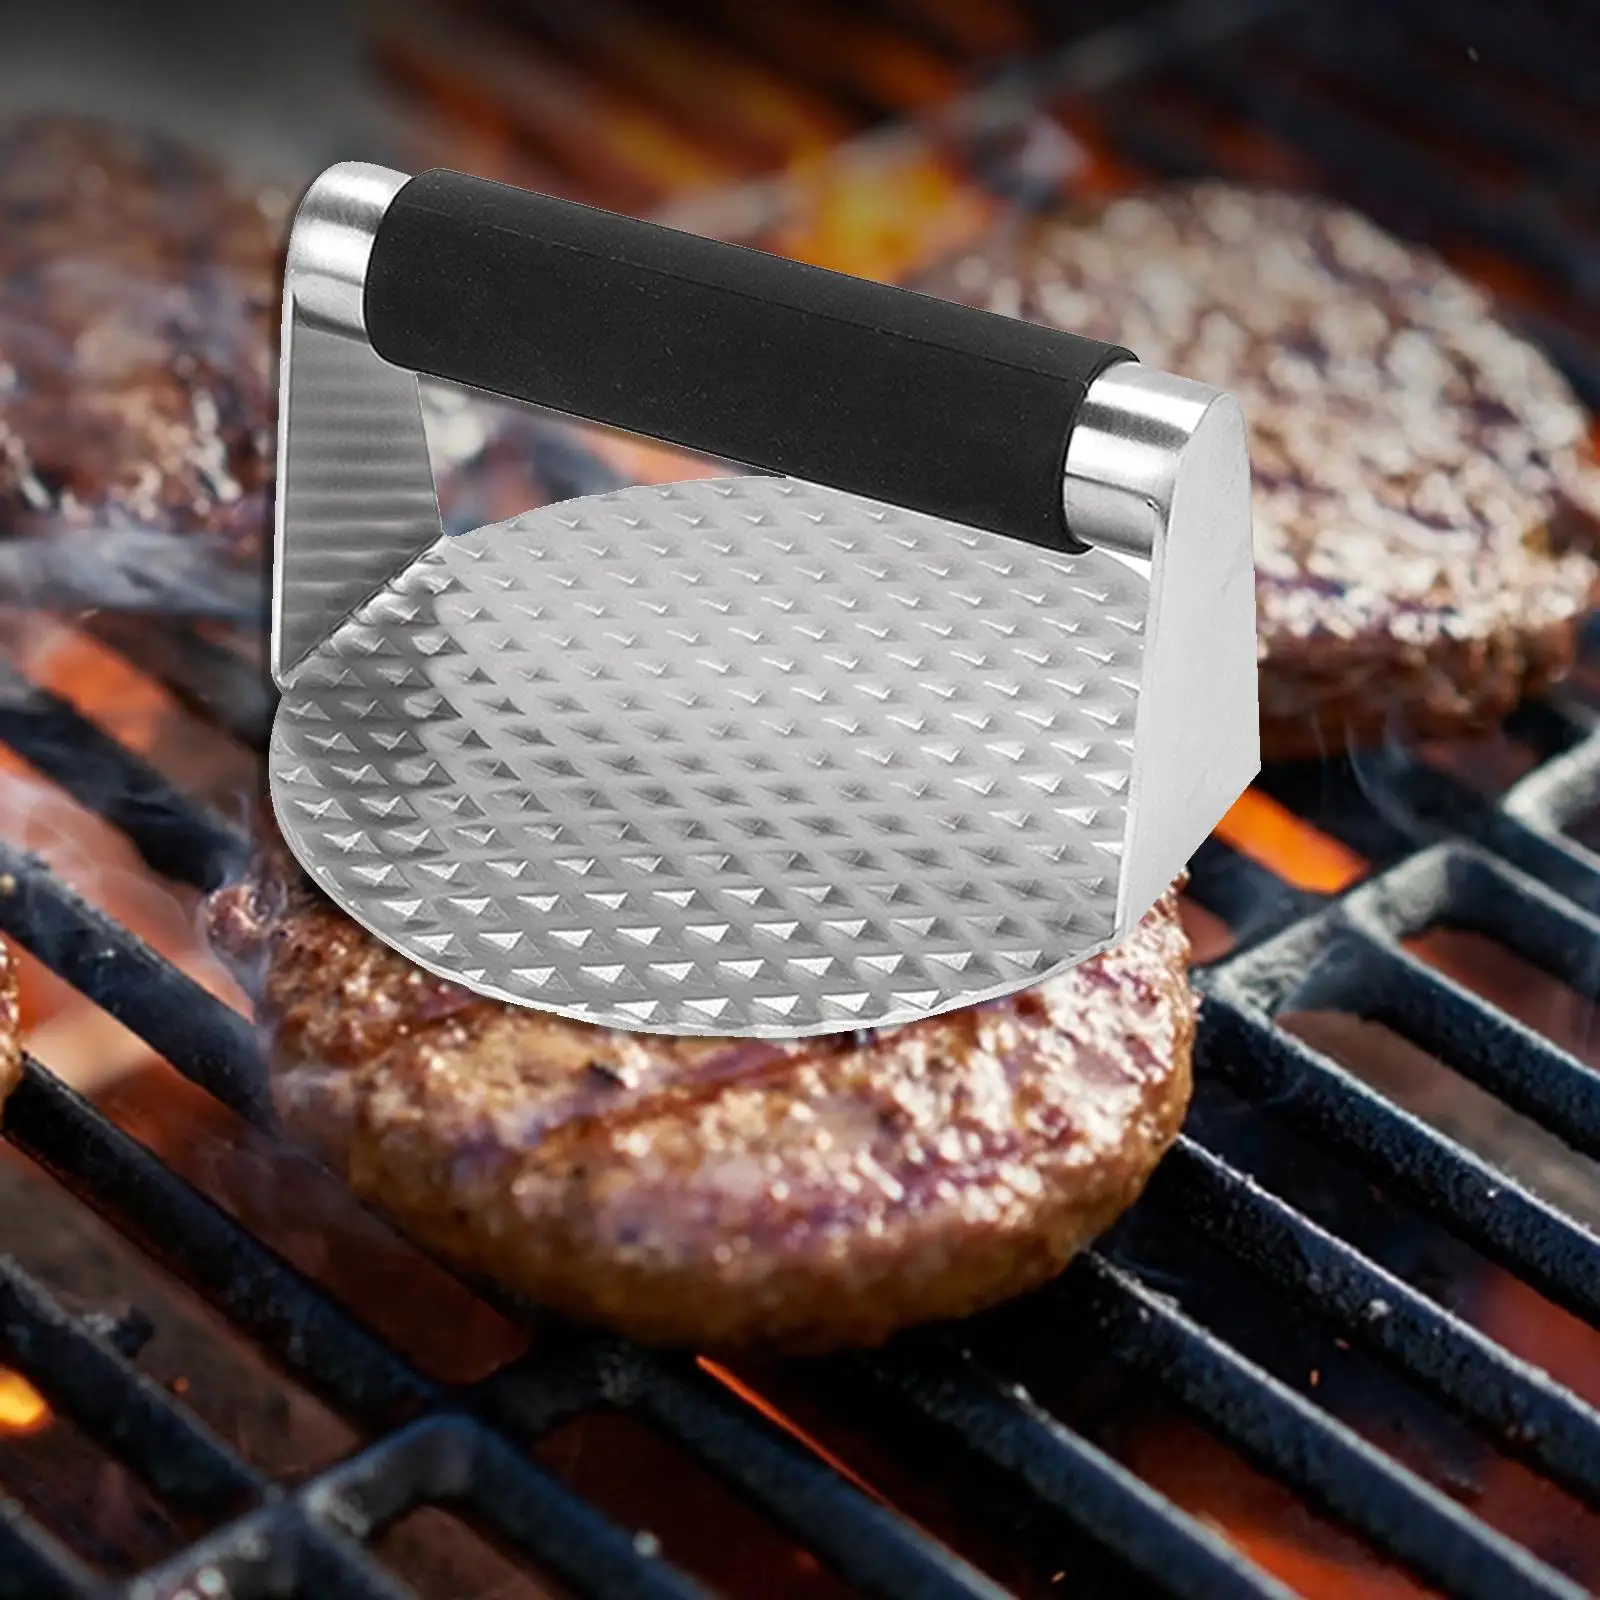 Stainless Steel Burger Press Nonstick Kitchen Accessories Baking Tools Grill Press for Steaks Sandwich Grill Cooking